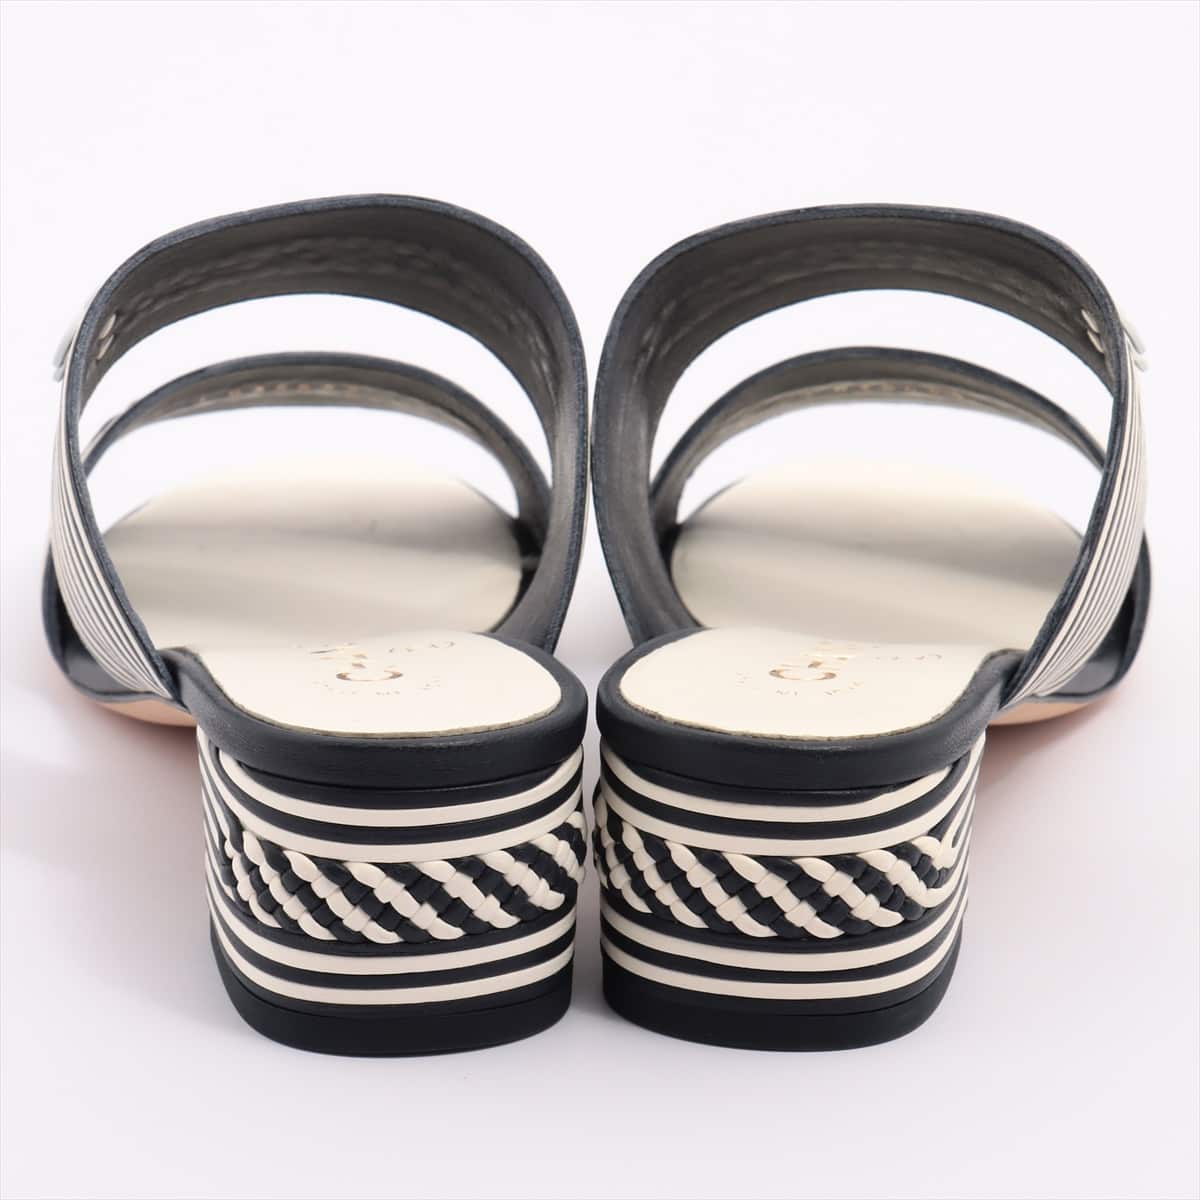 Chanel Coco Mark Leather Sandals 36.5 Ladies' White x navy